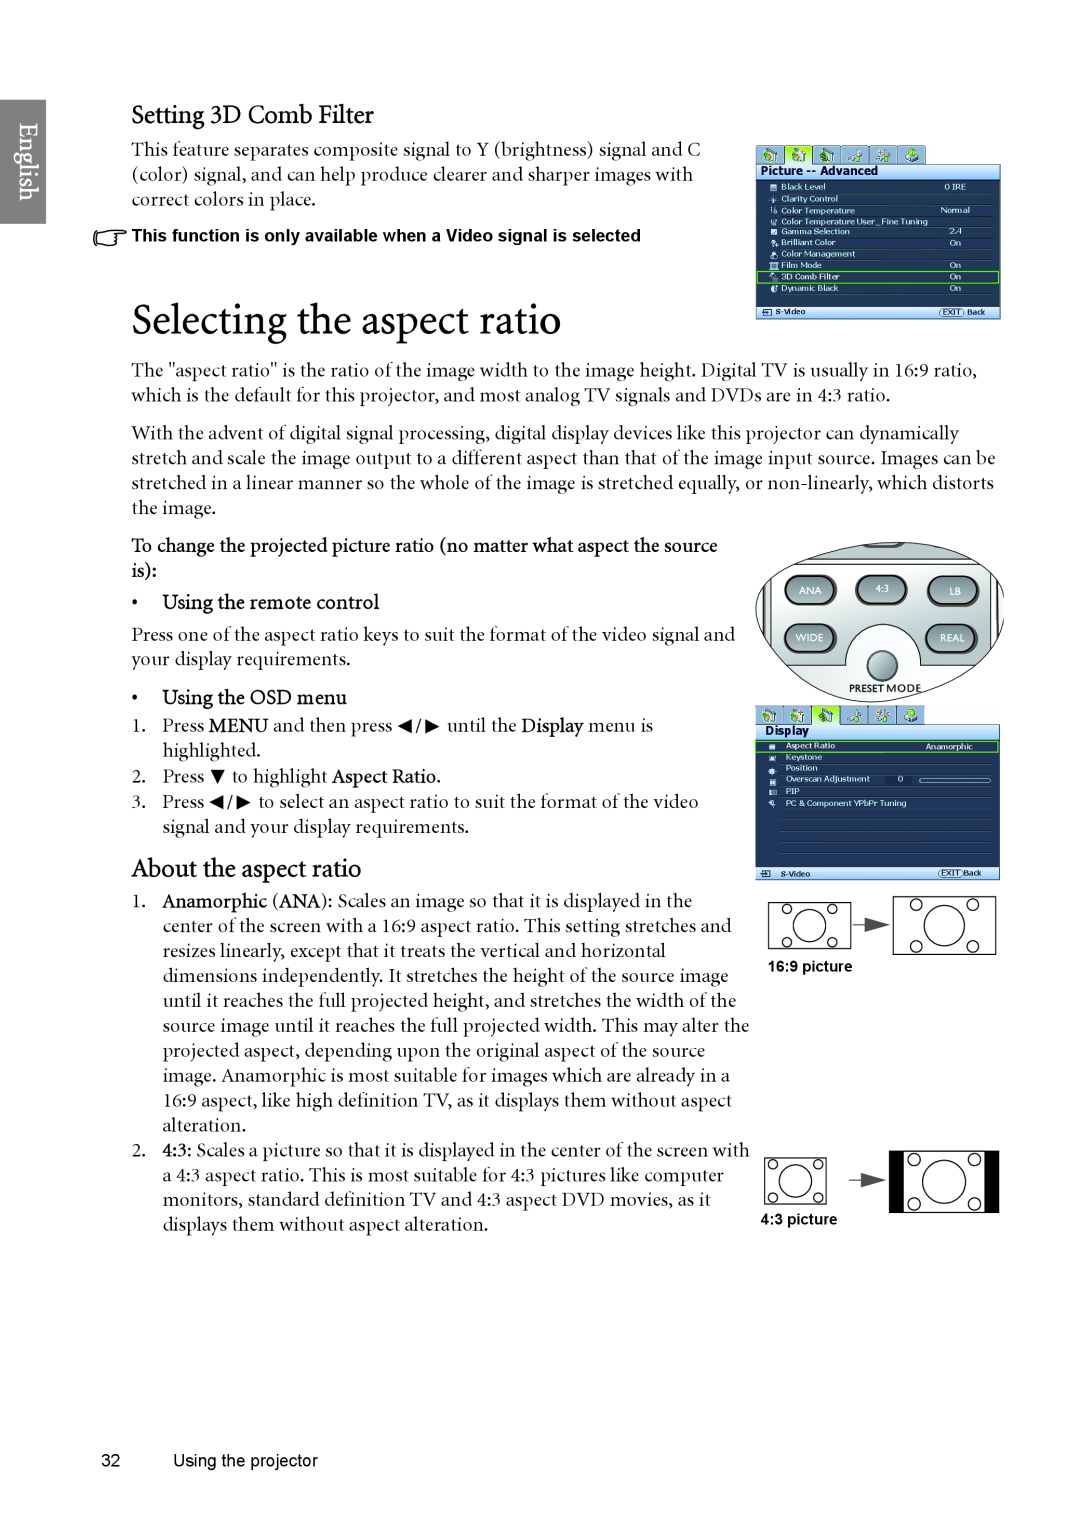 BenQ W6500 user manual Selecting the aspect ratio, Setting 3D Comb Filter, About the aspect ratio, English 